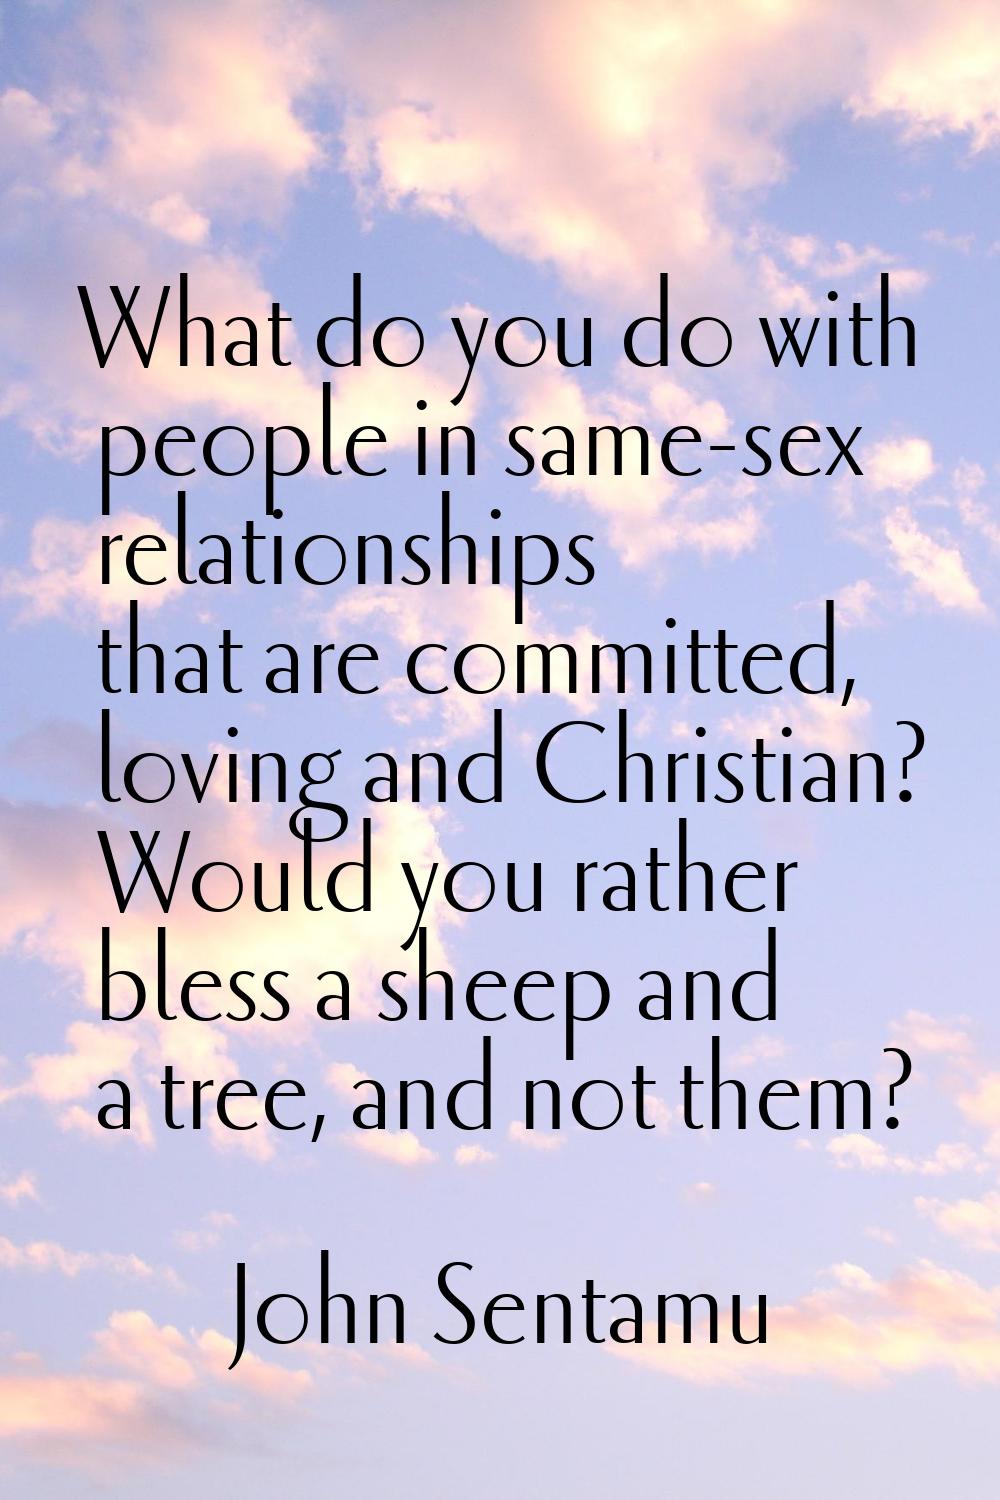 What do you do with people in same-sex relationships that are committed, loving and Christian? Woul